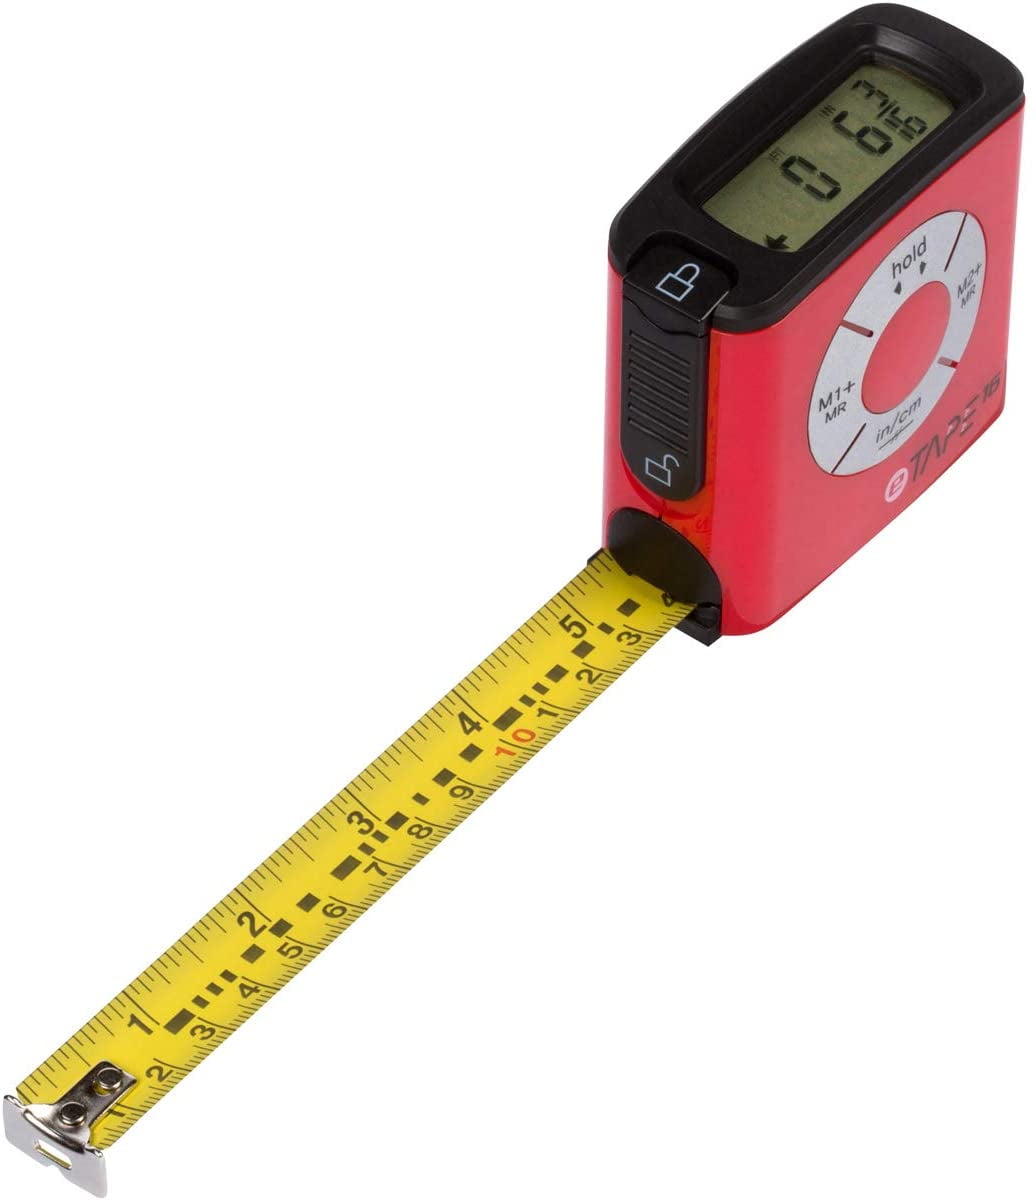  Kids Tape Measure Retractable Simple Tape Measure Wind-Up Tape  Resources Play Tape Measure Construction Toy for Kids Children : Arts,  Crafts & Sewing